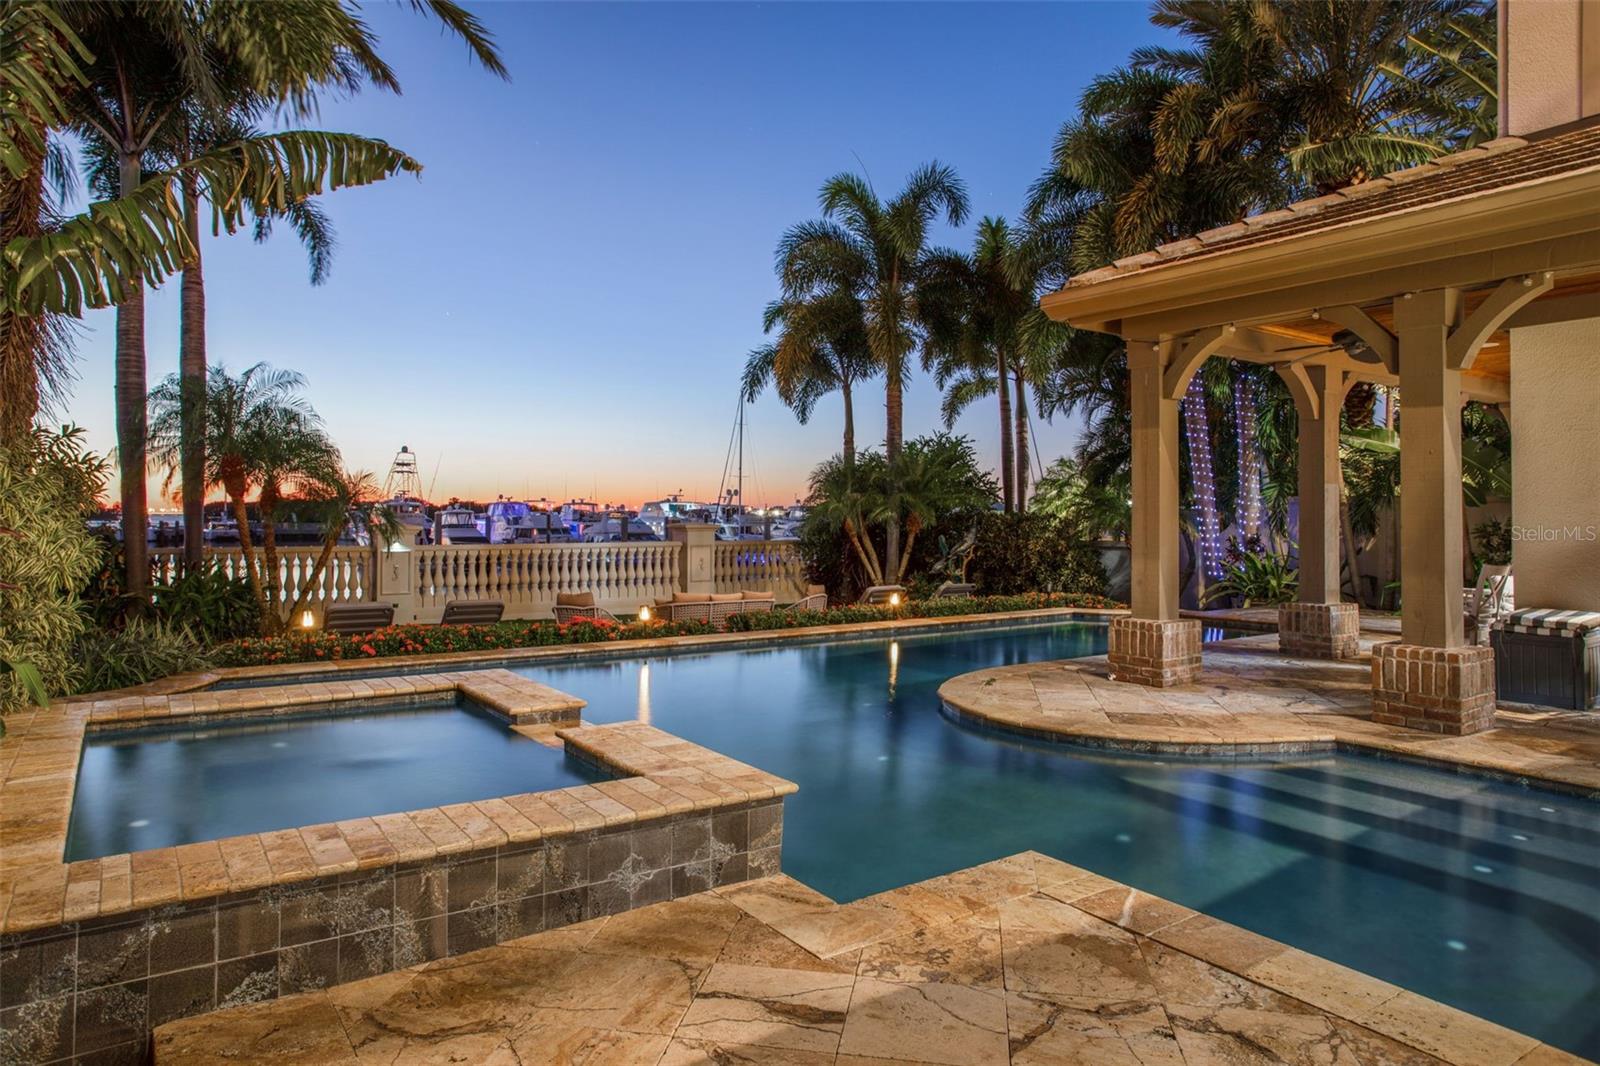 Soak up the sunset in the heated saltwater pool or let go of a hectic day in the hot tub in your own private oasis.